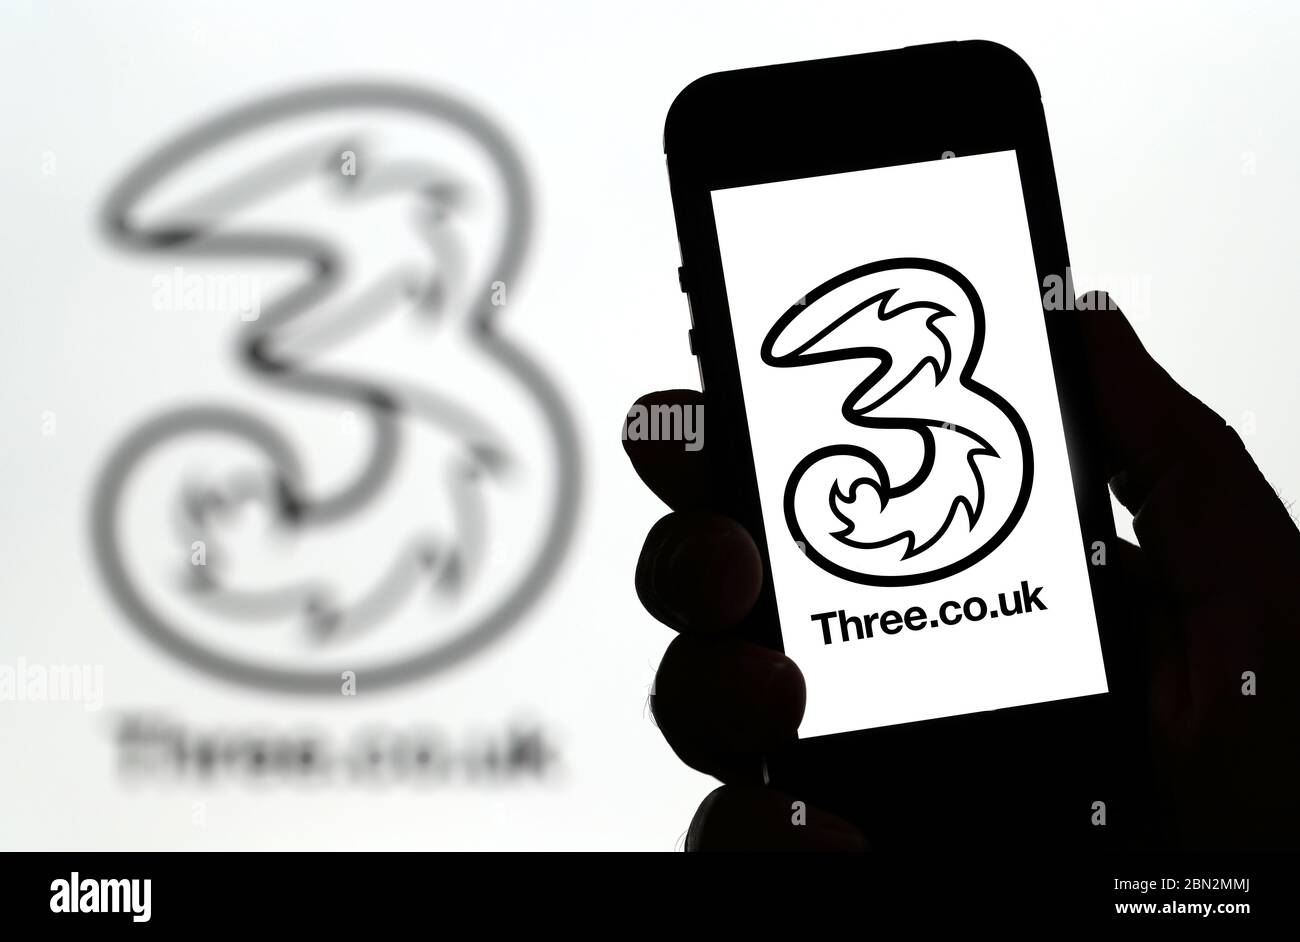 Three mobile phone network logo on a mobile phone (Editorial use only) Stock Photo